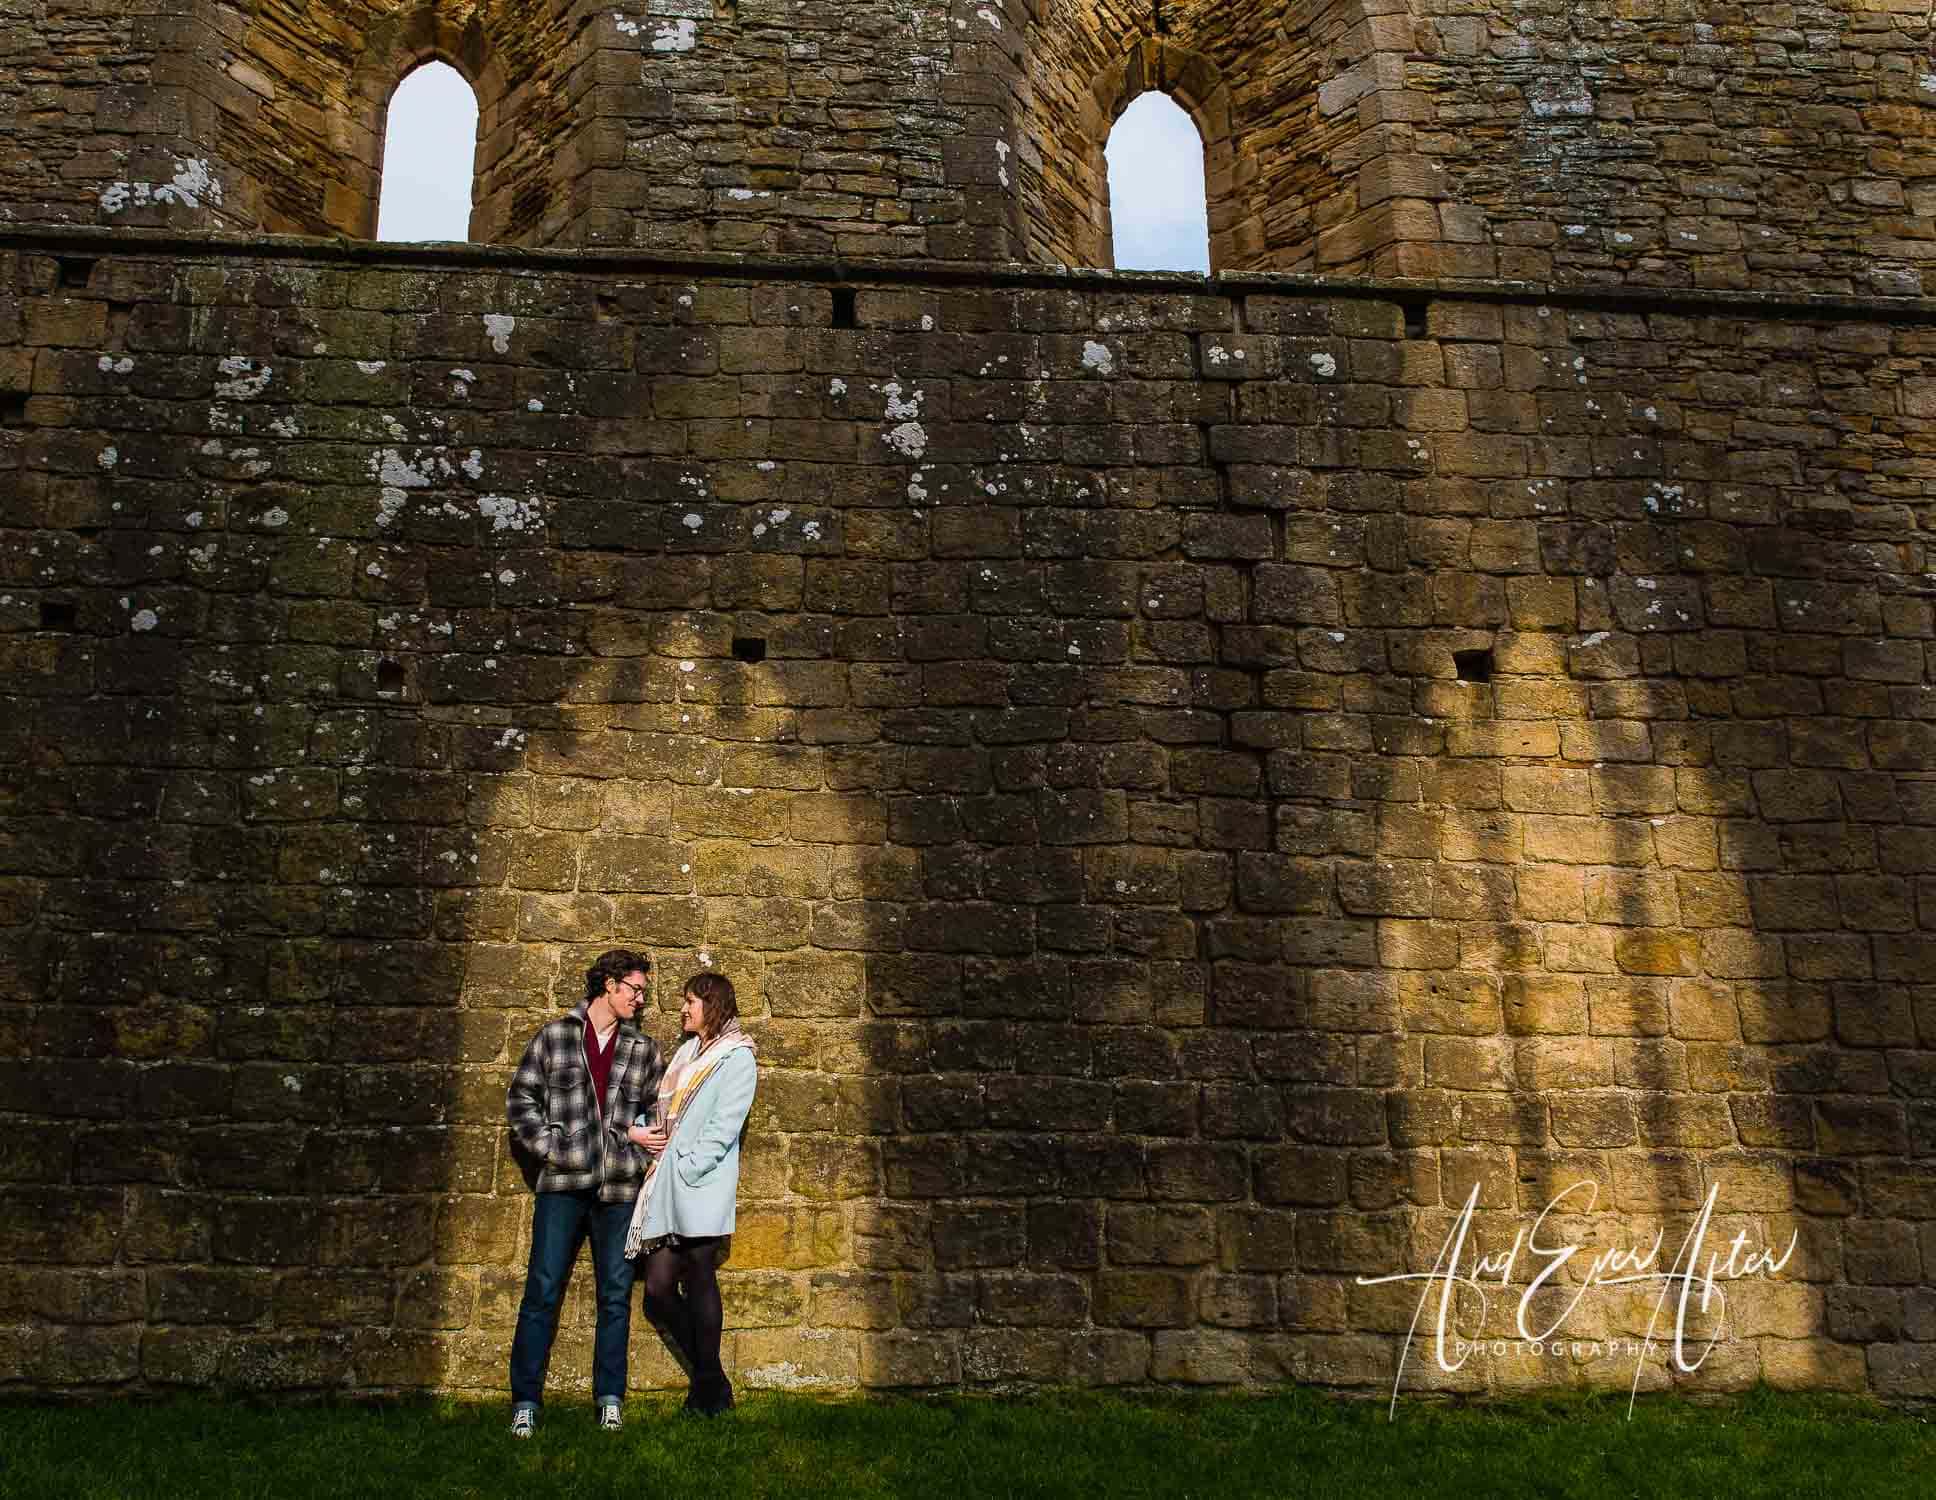 engagement photshoot, bride and groom to be at abbey ruins on photoshoot